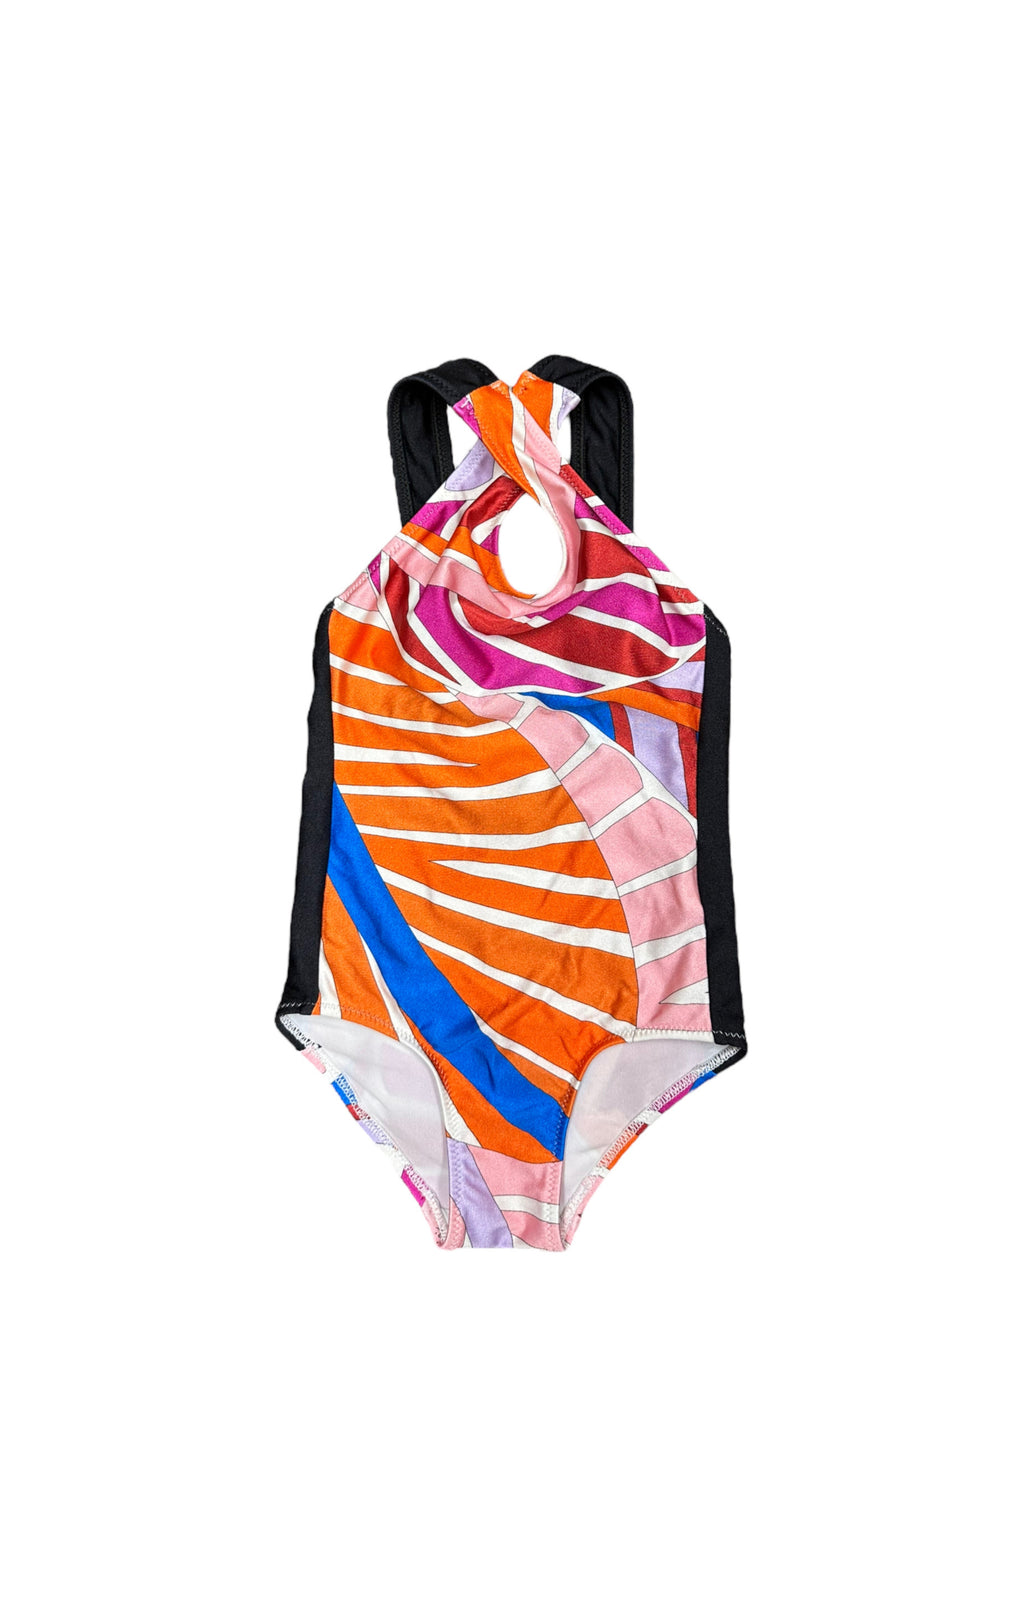 EMILIO PUCCI (RARE) Swimsuit Size: 4 Years